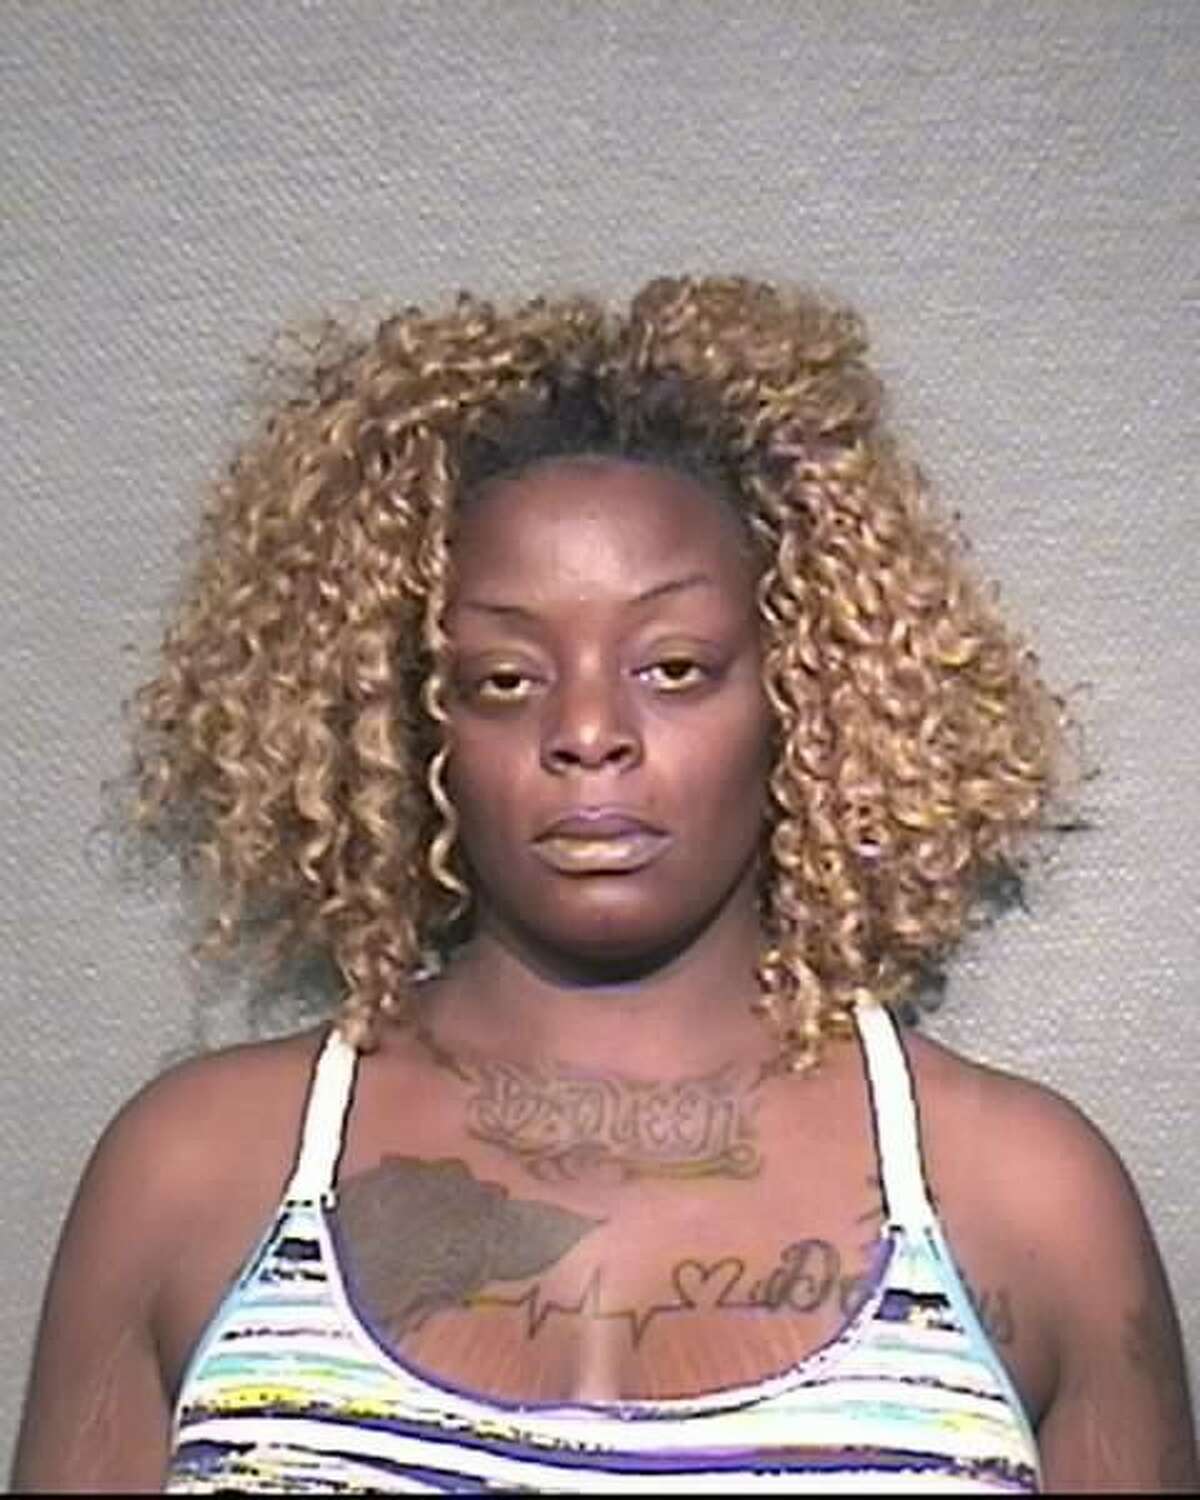 Sheborah Latrice Thomas, 30, is charged with two counts of capital murder in the deaths of her two children, ages 7 and 5, about 9:30 a.m. Friday, Aug. 12, 2016 at 3011 Tierwester in southeast Houston. (Houston Police Department)